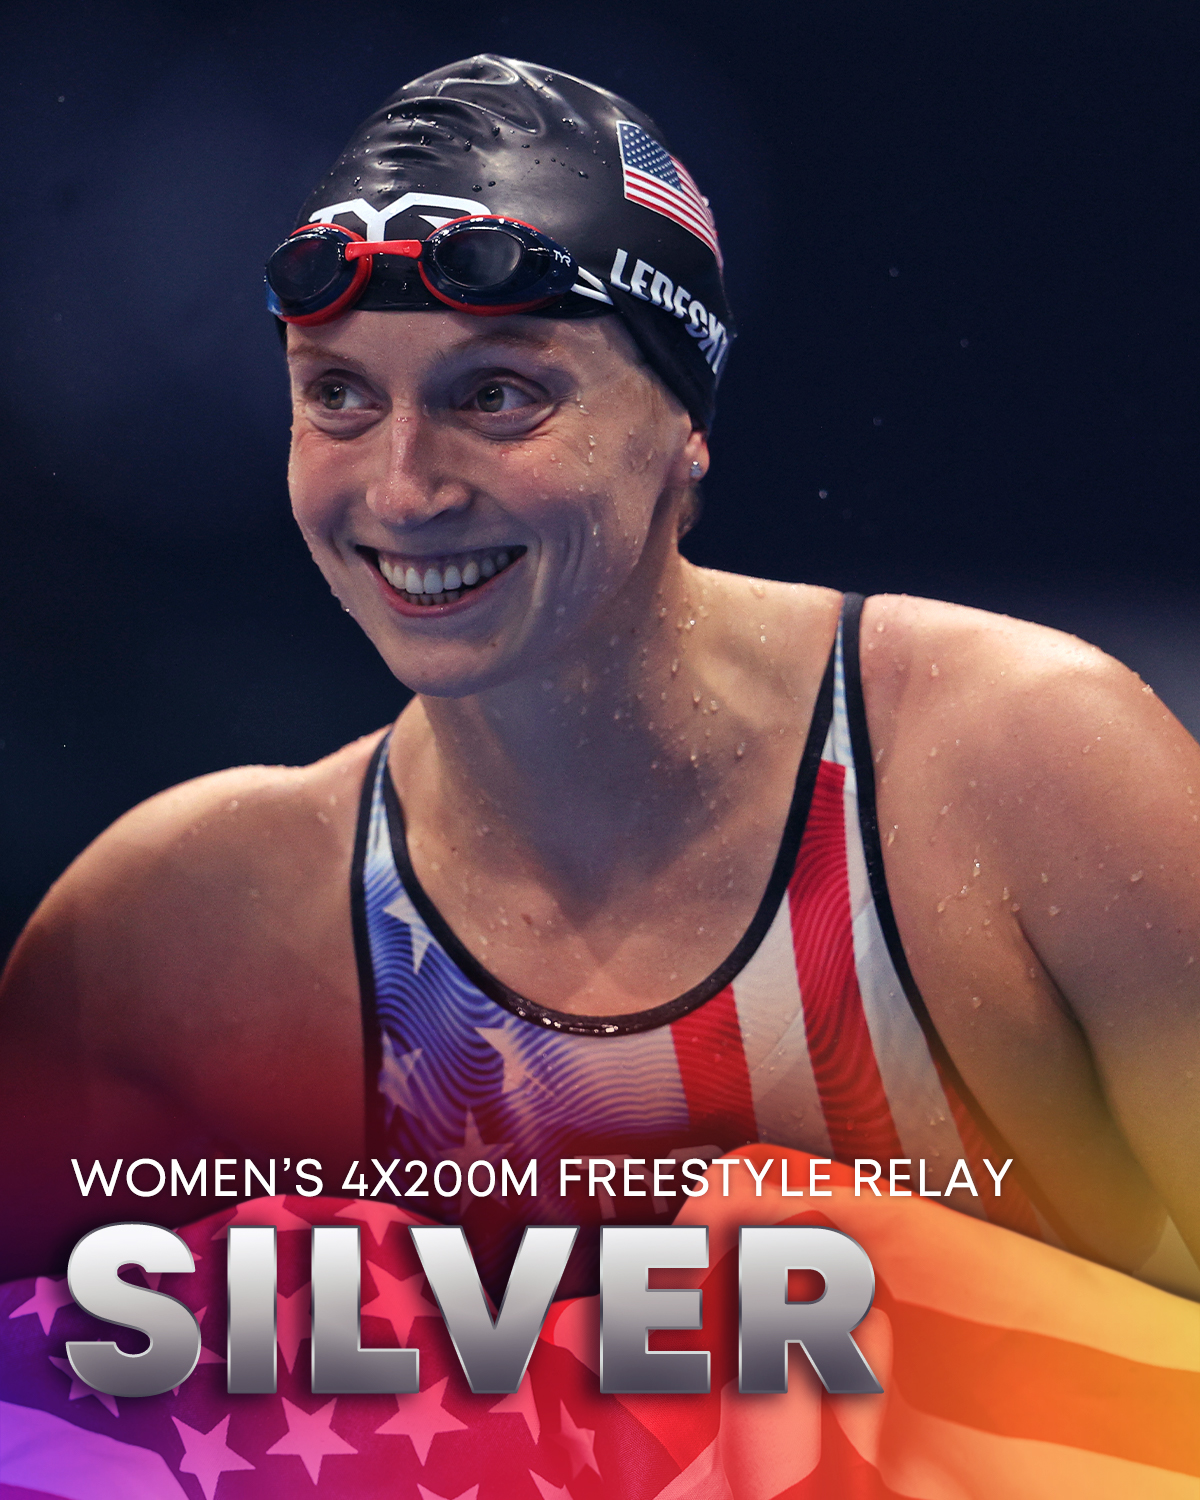 Katie Ledecky anchored the women's 4x200m free relay to the silver medal